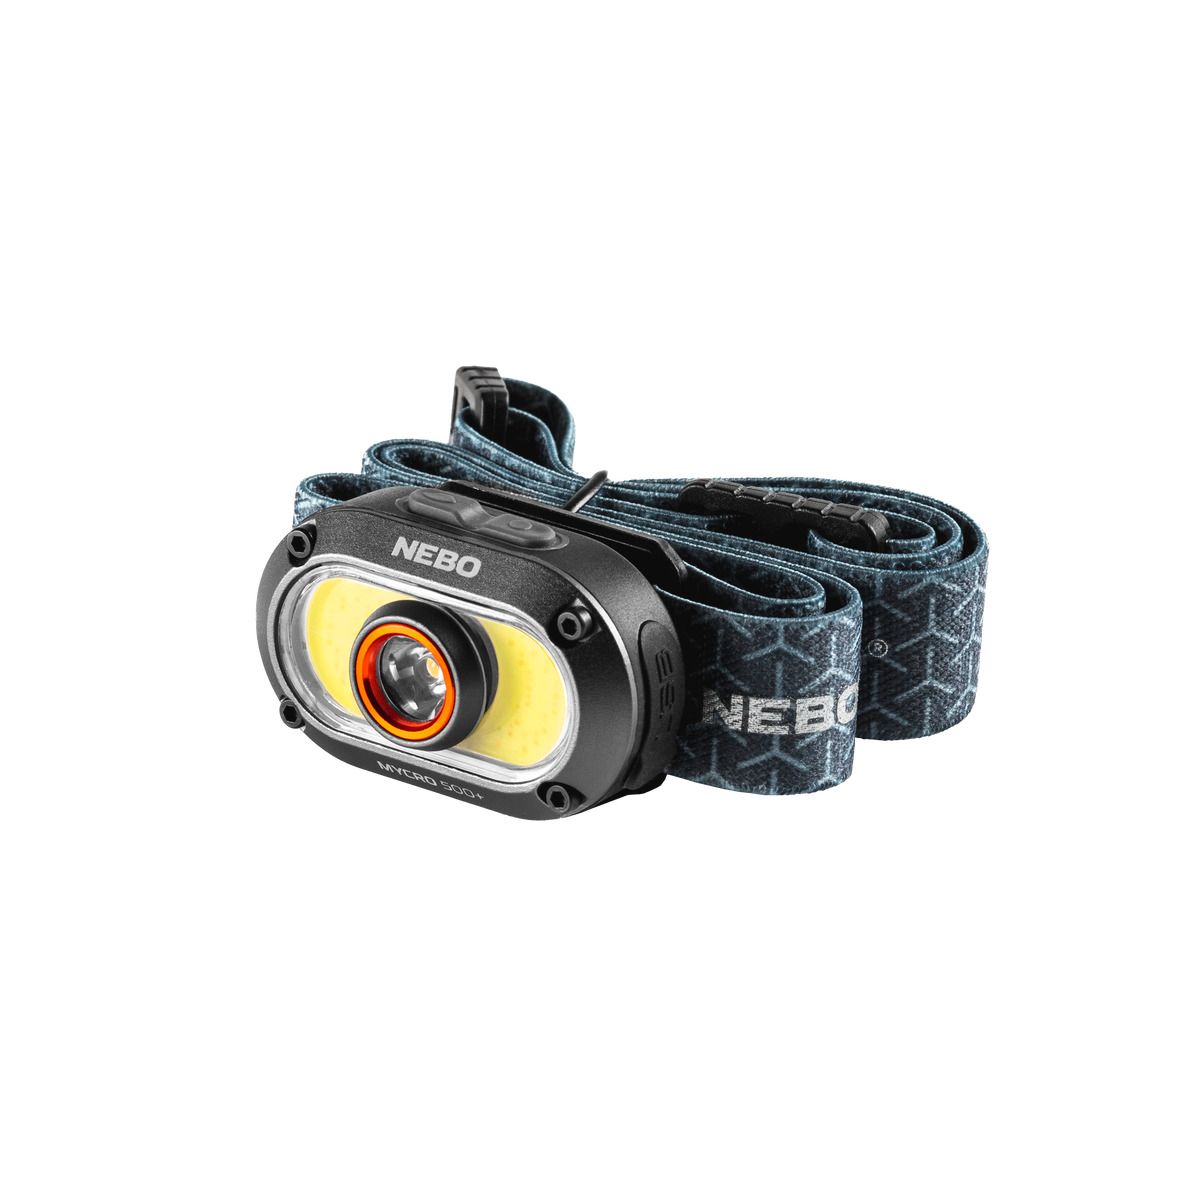 MYCRO 500+ USB-C Rechargeable Headlamp and Cap Light with 500 Lumen Turbo Mode - Sonic Electric